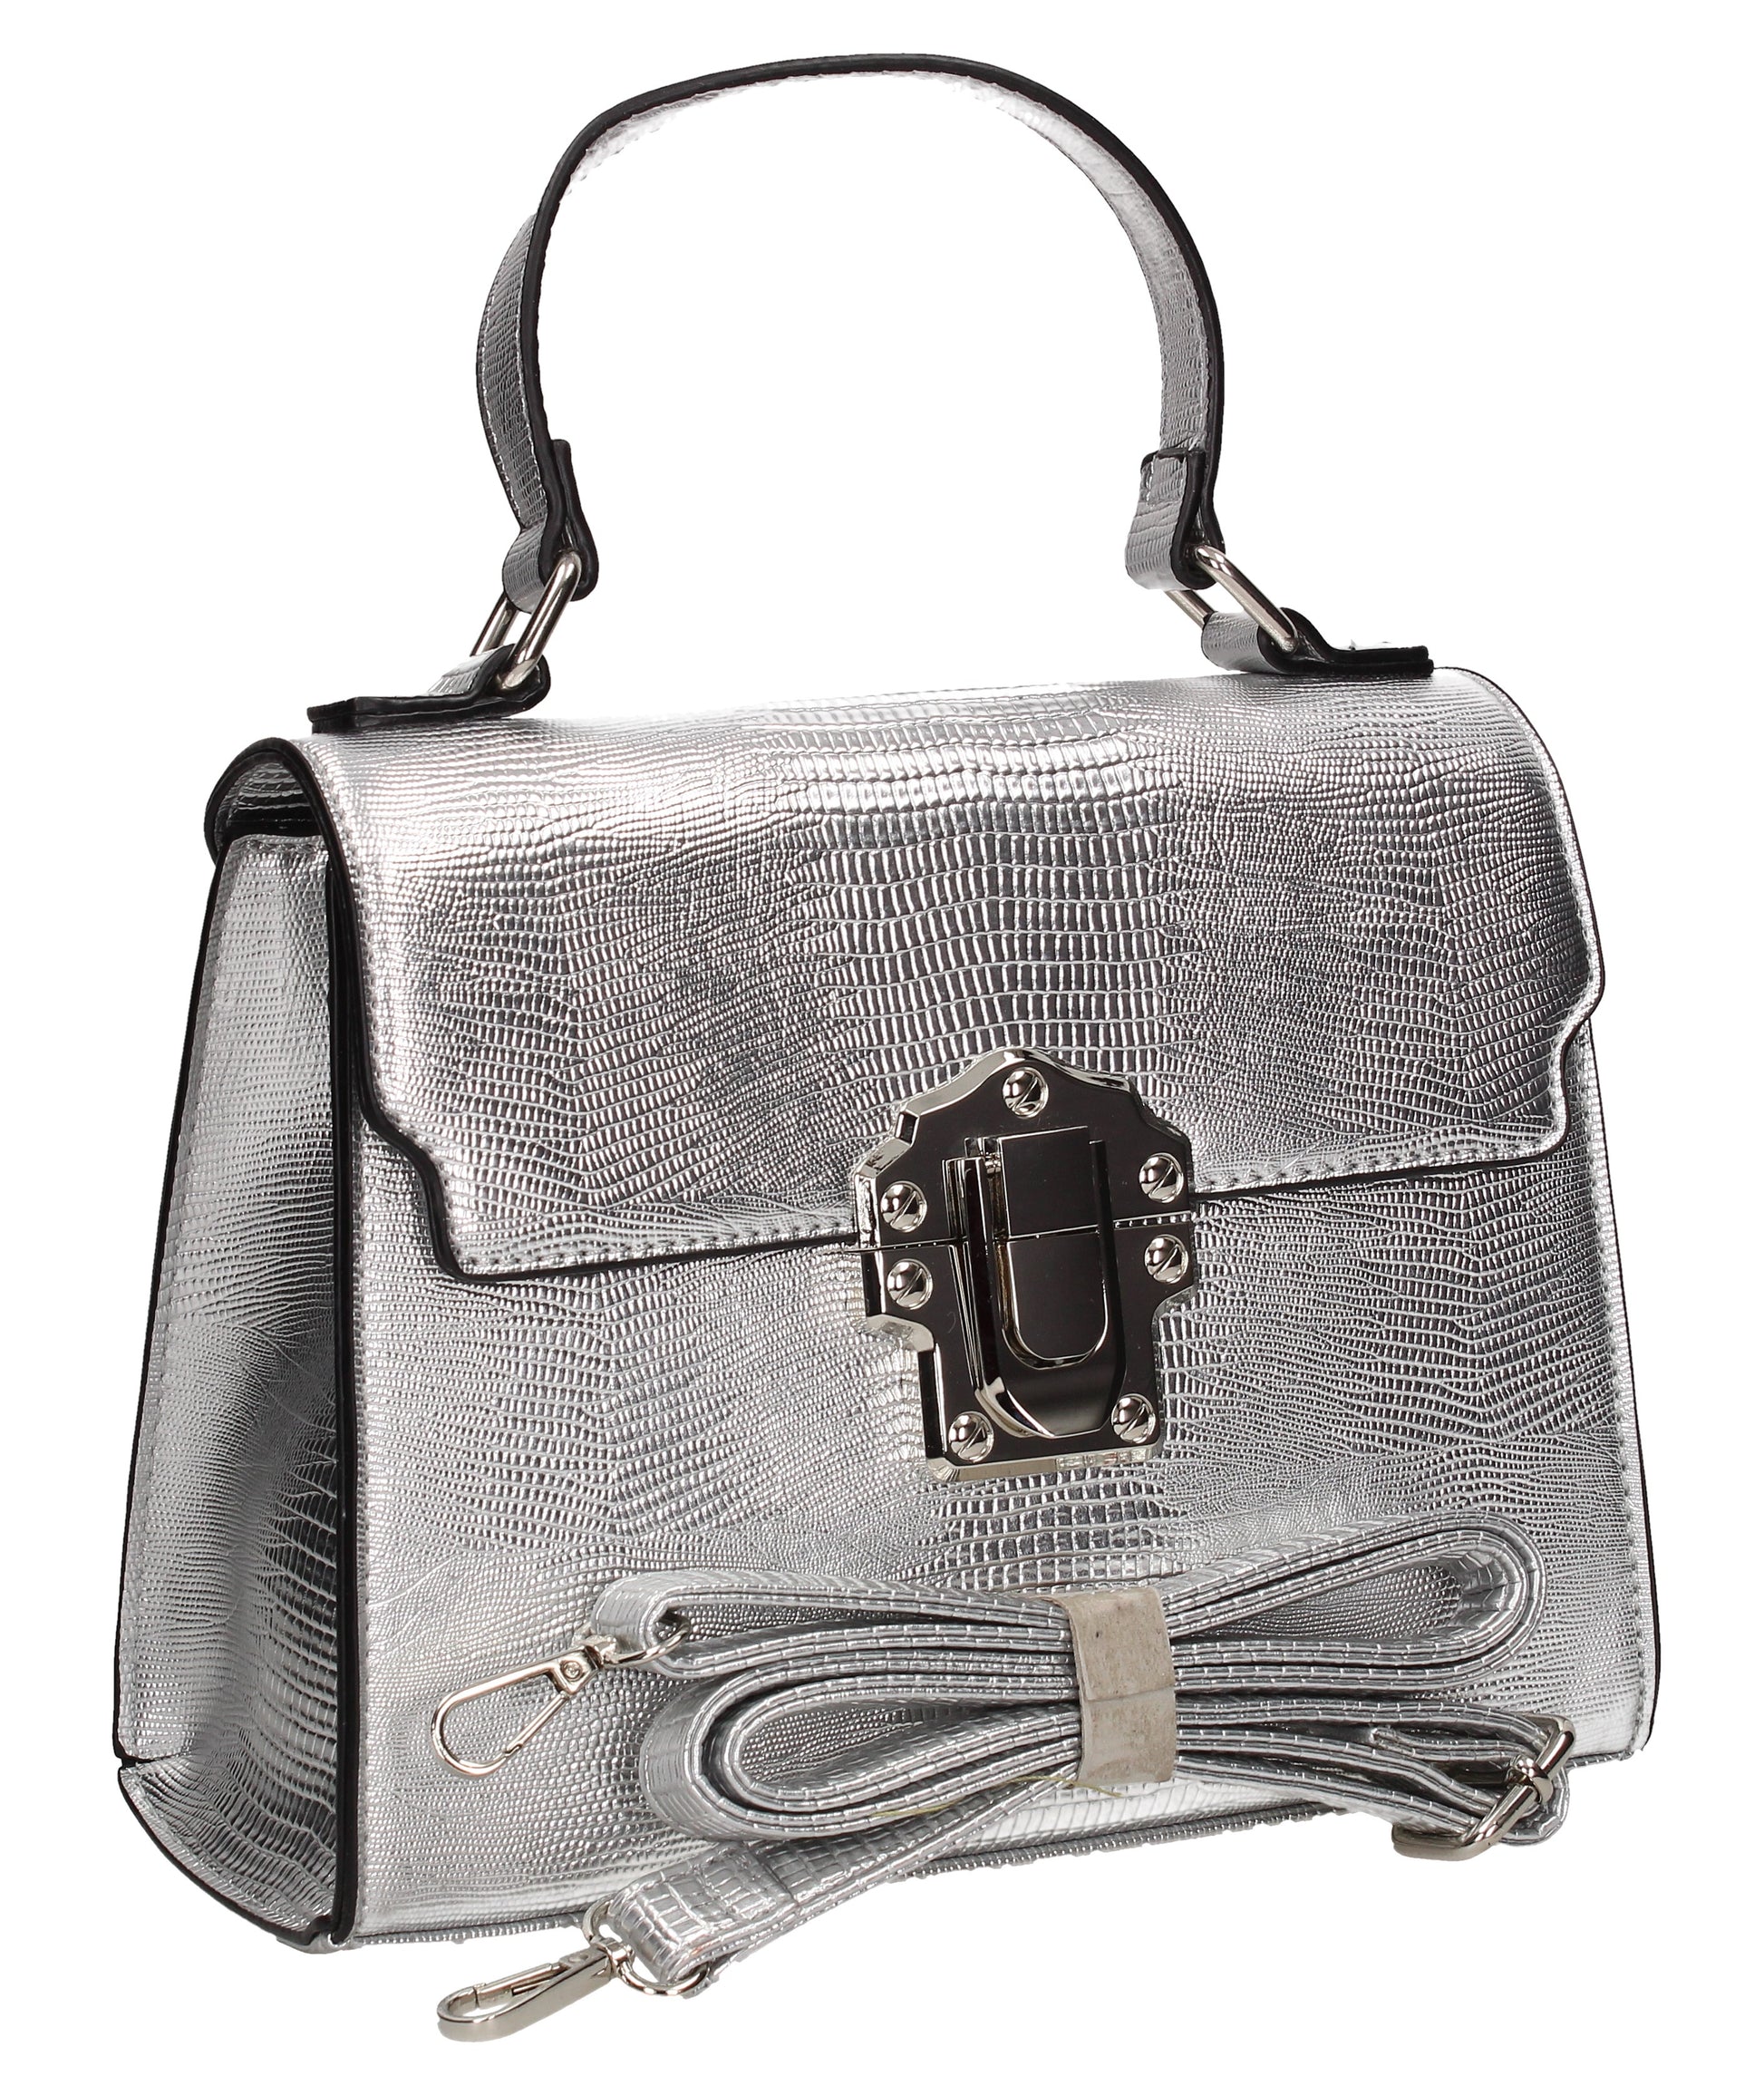 Swanky Swans Charlotte Handbag SilverPerfect for School, Weddings, Day out!